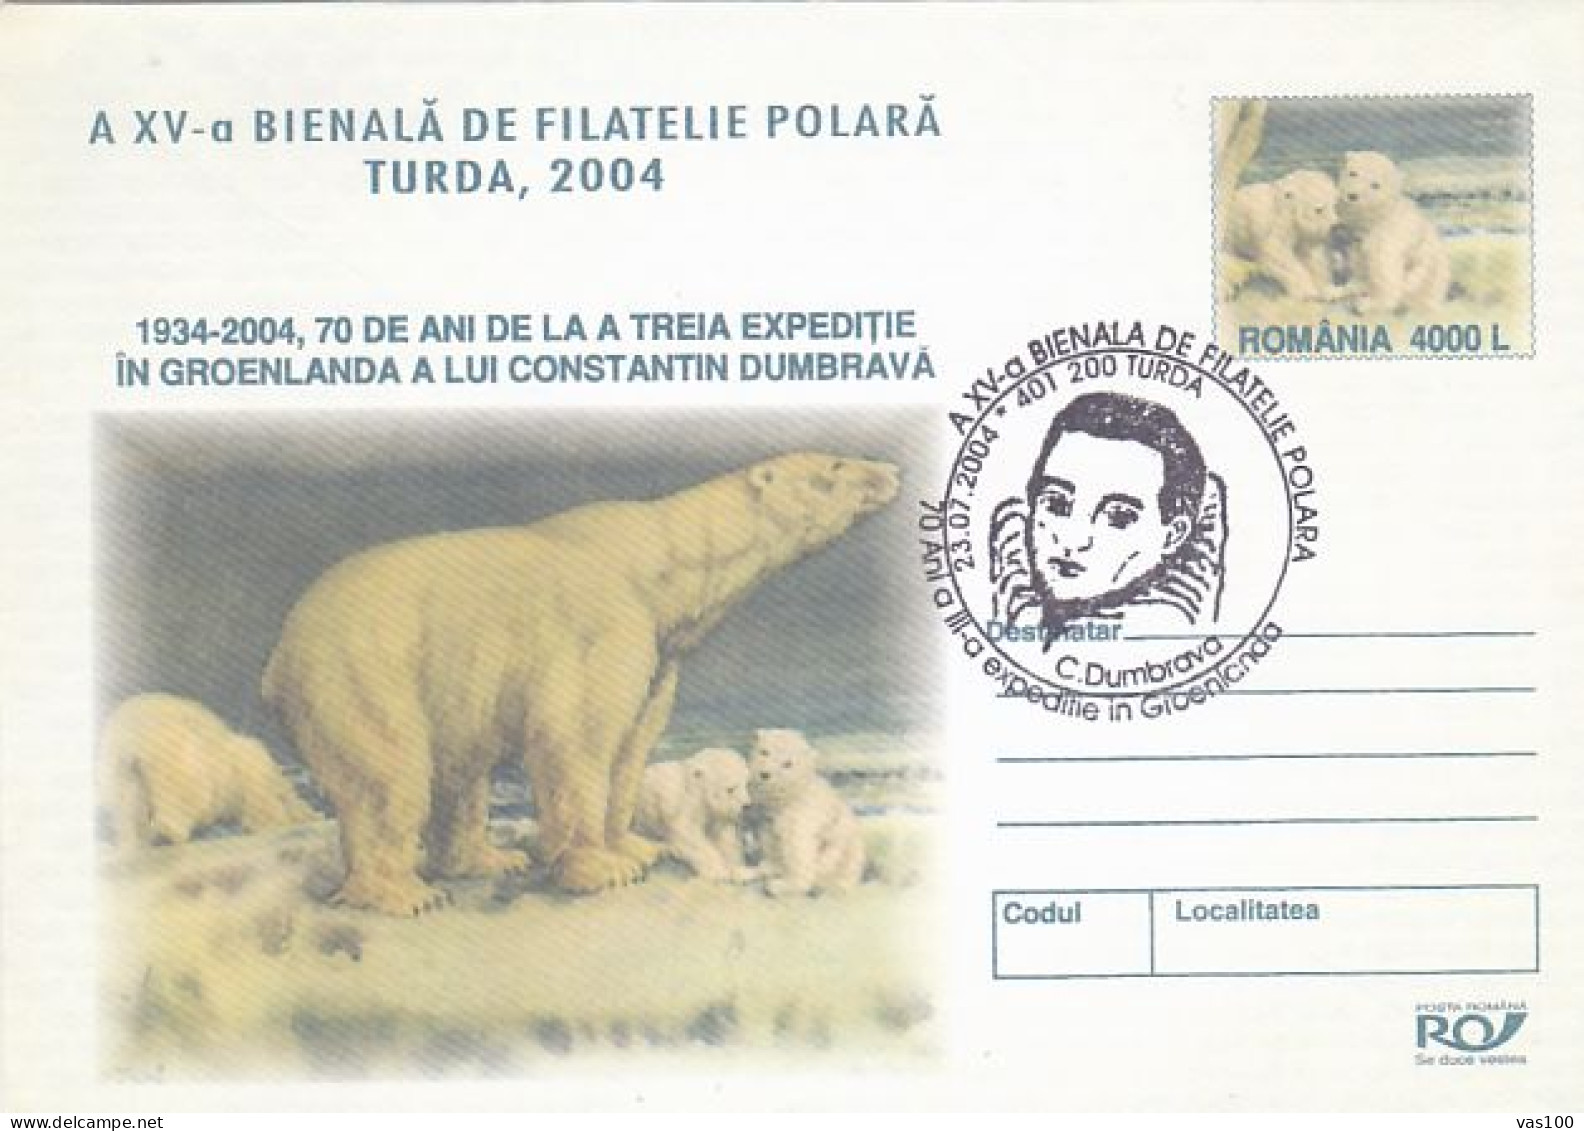 NORTH POLE, ARCTIC EXPEDITION, C. DUMBRAVA IN GREENLAND, POLAR BEAR, COVER STATIONERY, ENTIER POSTAL, 2004, ROMANIA - Expéditions Arctiques